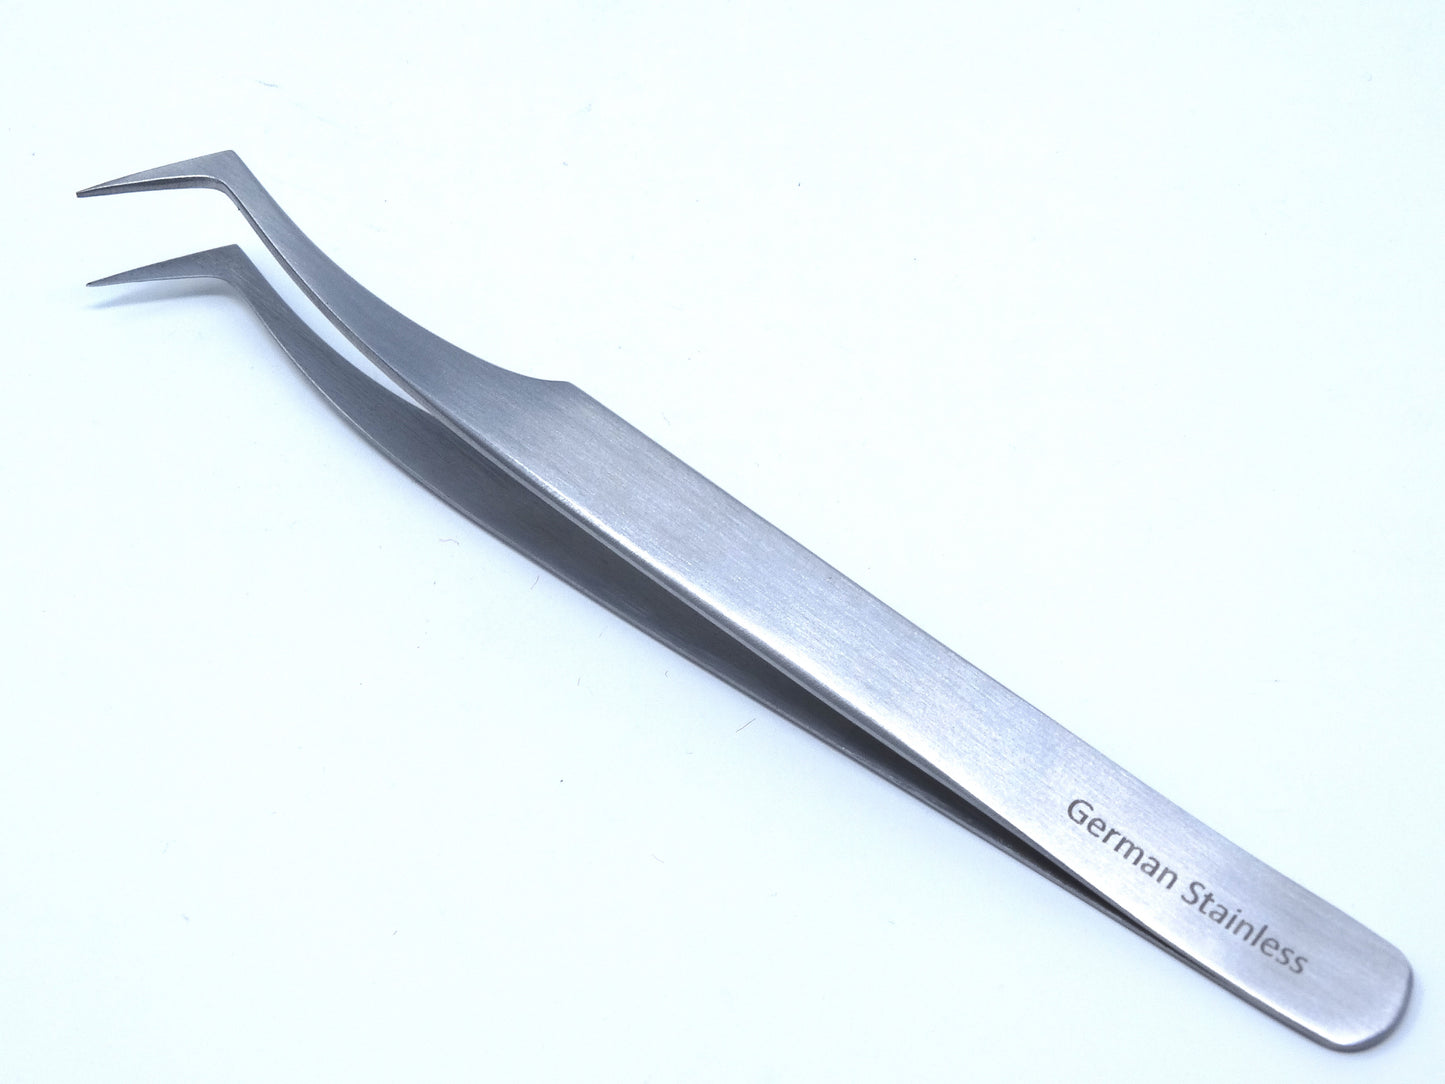 Stainless Steel Micro Surgical Forceps Tweezers Semi Angled, Premium Quality